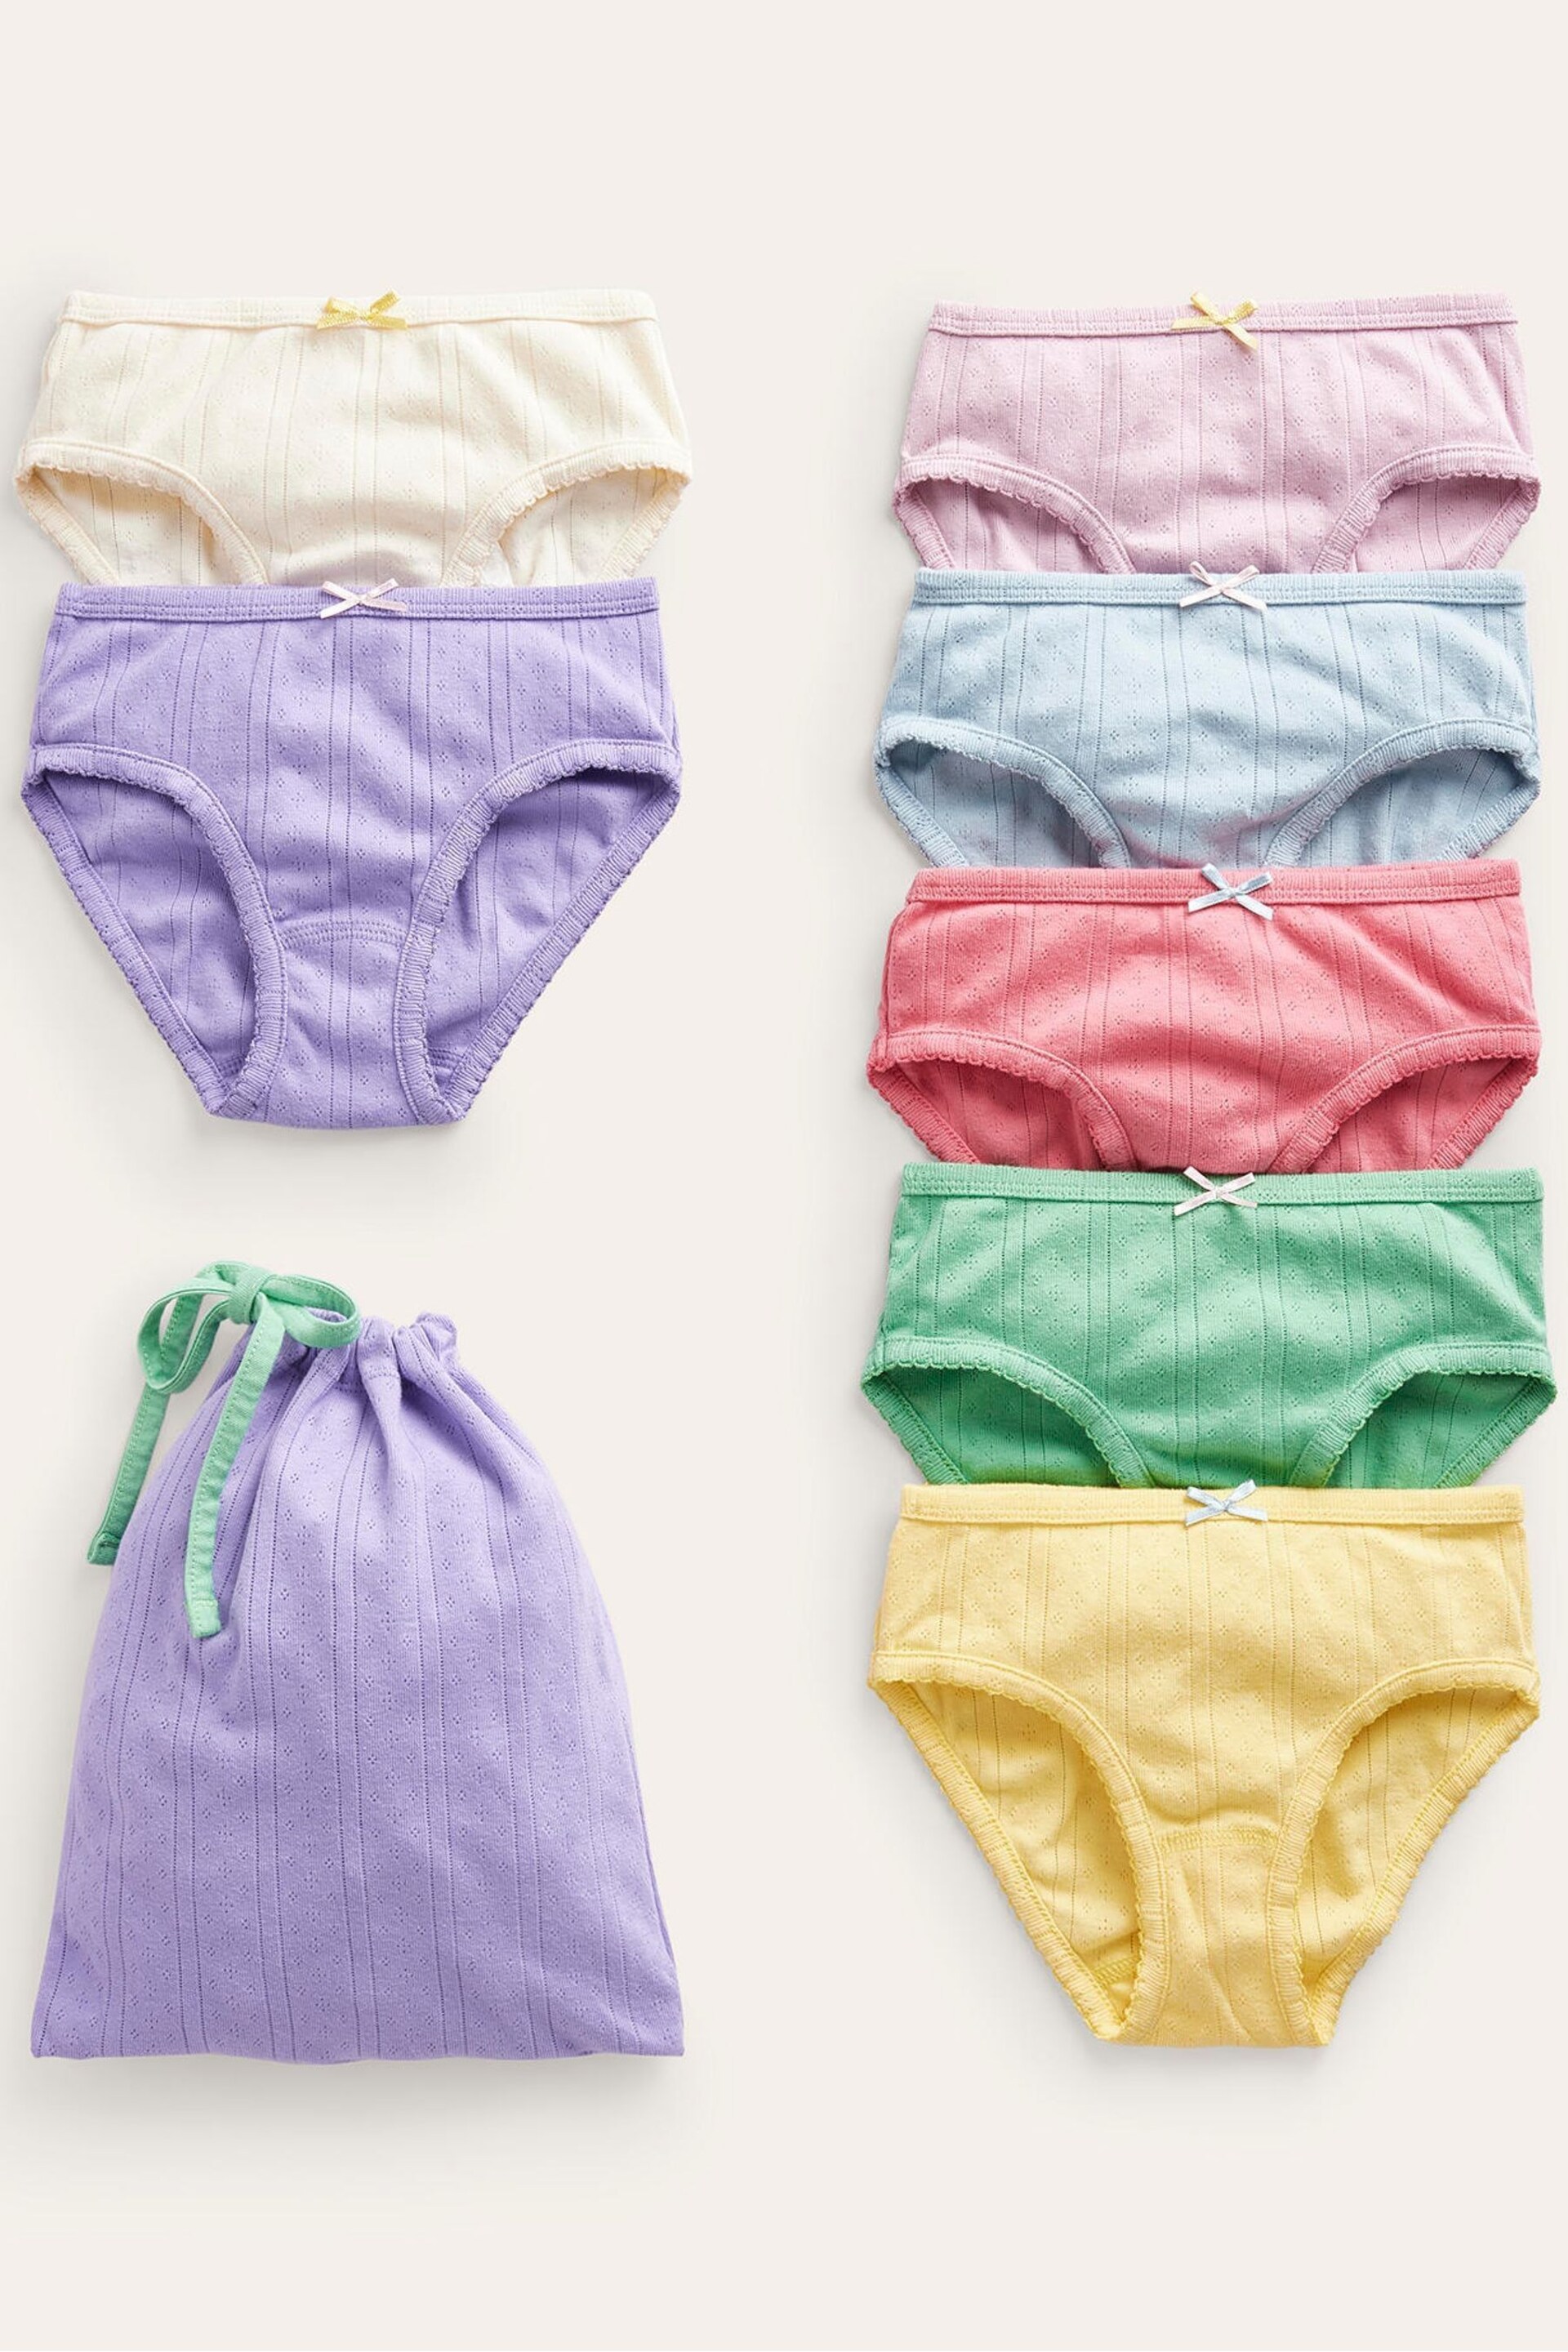 Boden Pink 7 Pack Knickers - Image 1 of 3